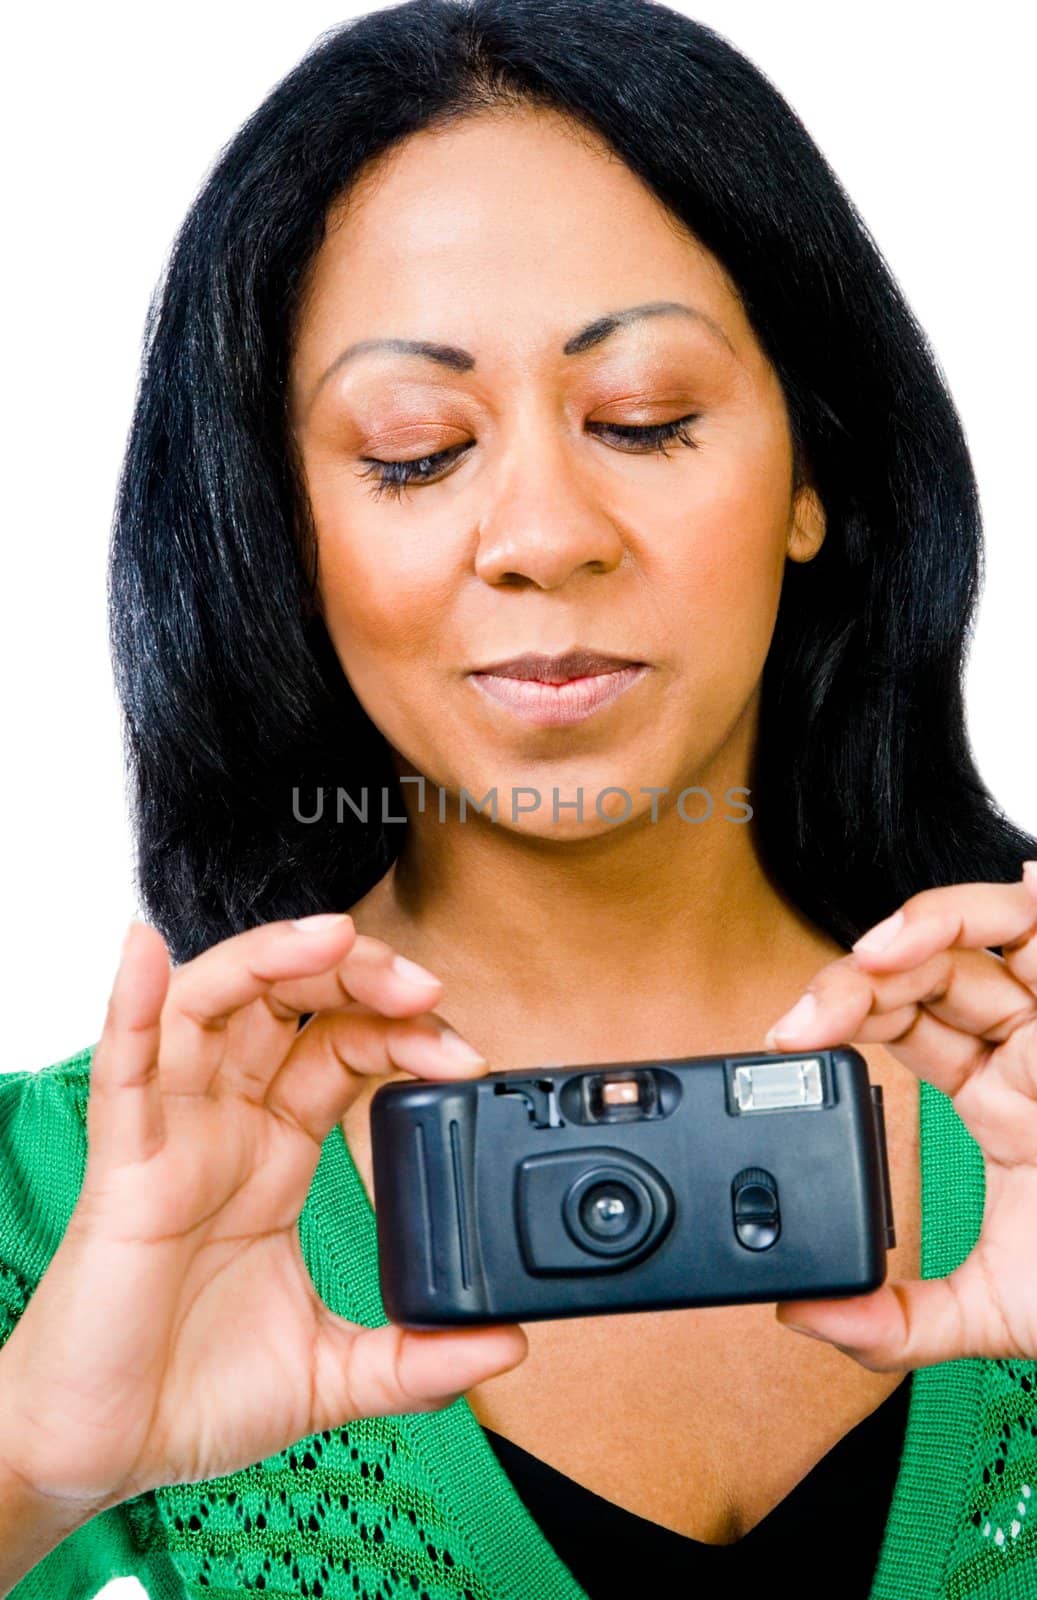 Close-up of a woman photographing with a camera and smiling isolated over white